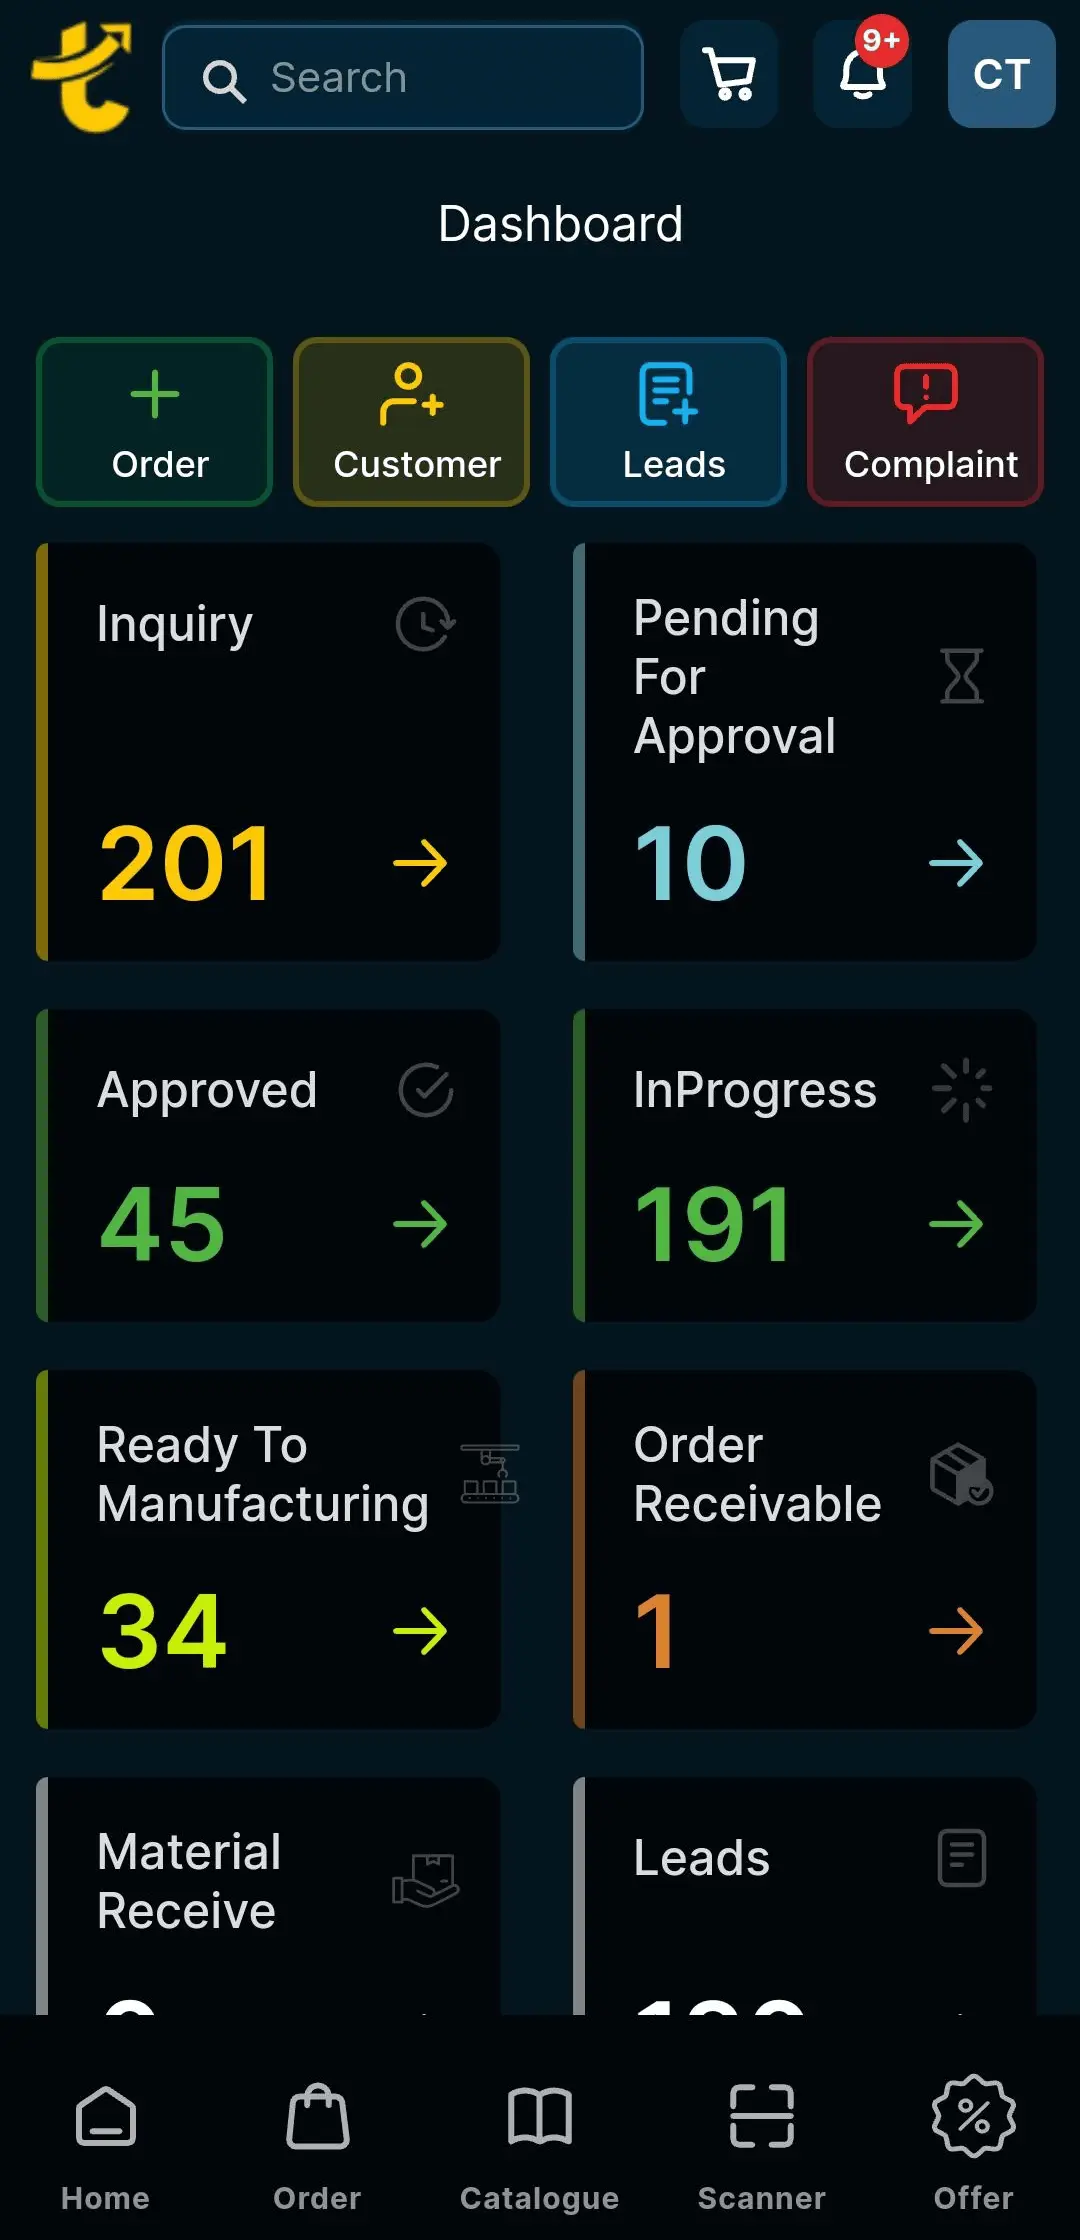 Tanyo CRM ipad dashboard screen displaying various business metrics with a count of such as Inquiry, Pending For Approval, Approved, InProgress, Order Receivable, Material Receive, Leads and Complaint with arrow icons pointing to the right next to each metric.